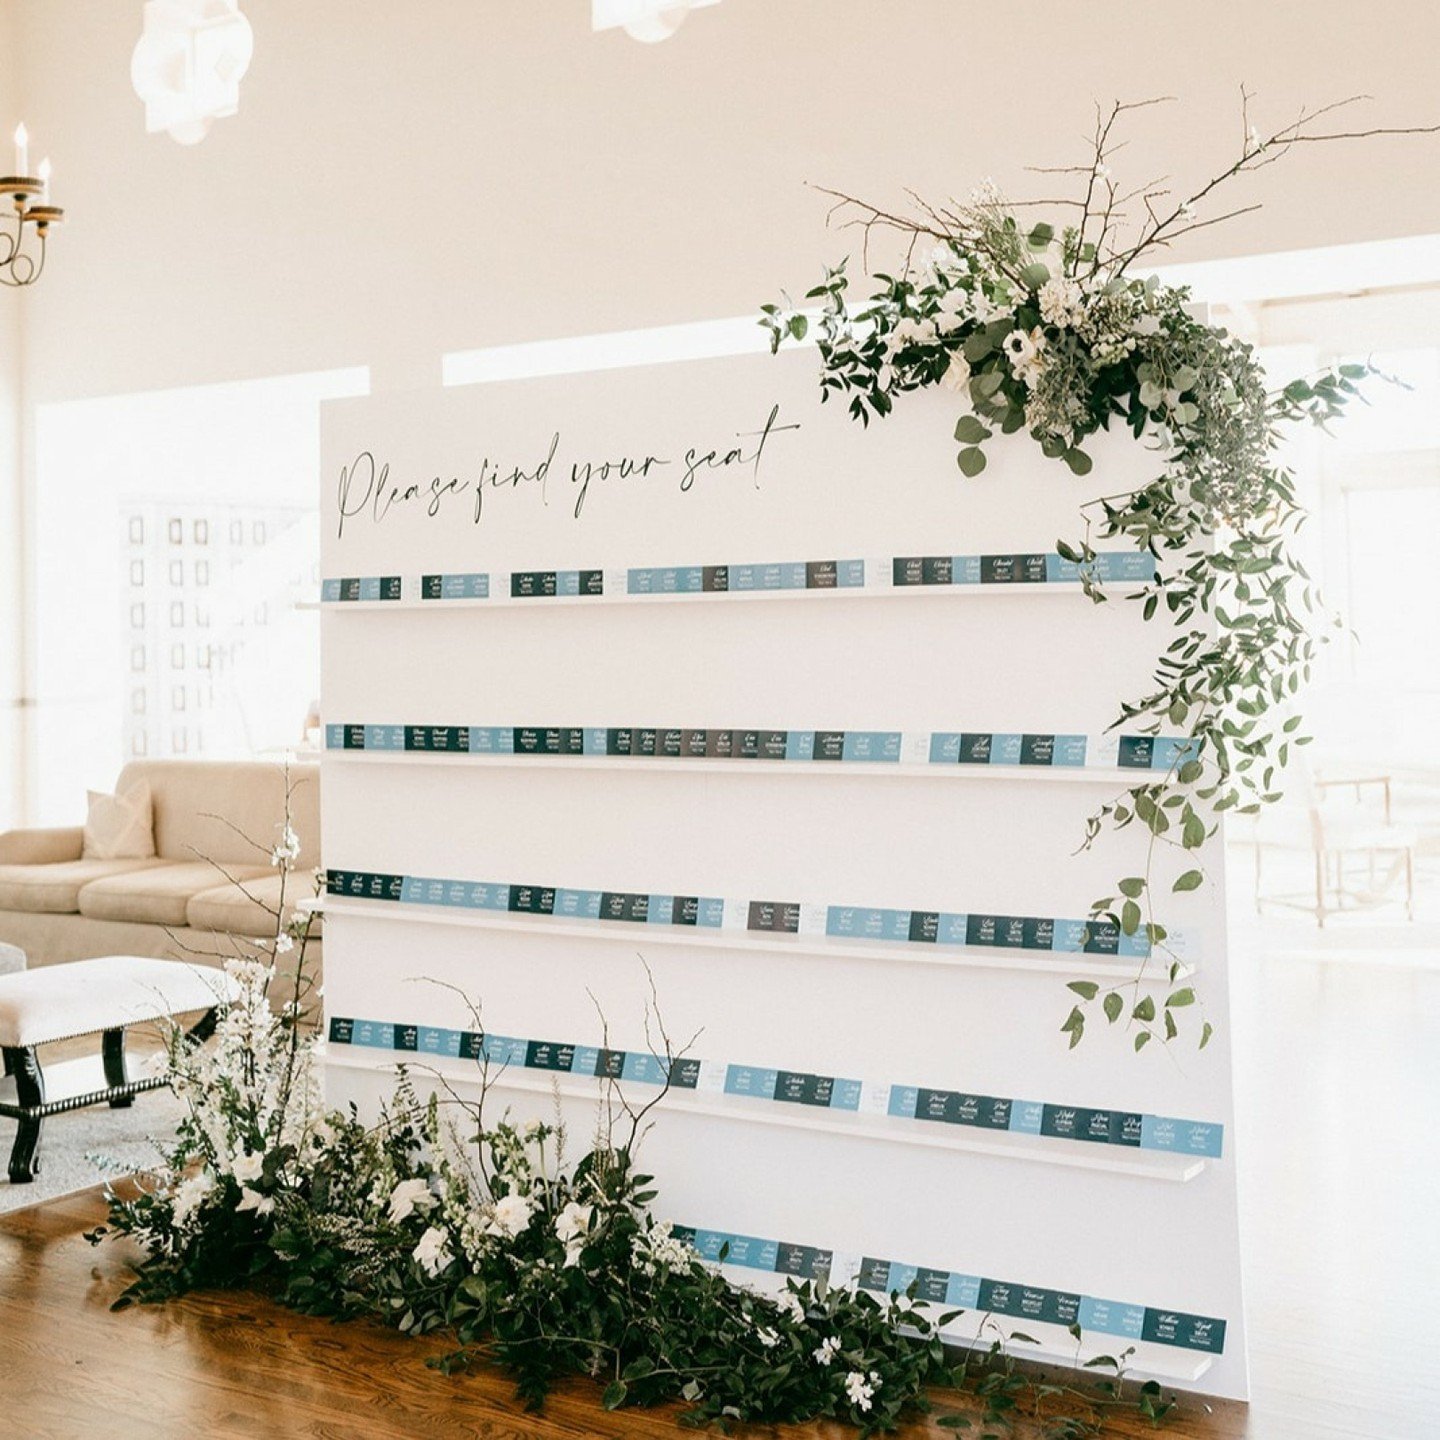 I love a large escort chart when the venue calls for it. And, the glorious @belairbayclub is a fabulous place for one!

Emma + Dennis loved the inspiration for this large sign that we put into their design document and @helloprettyevents created it t